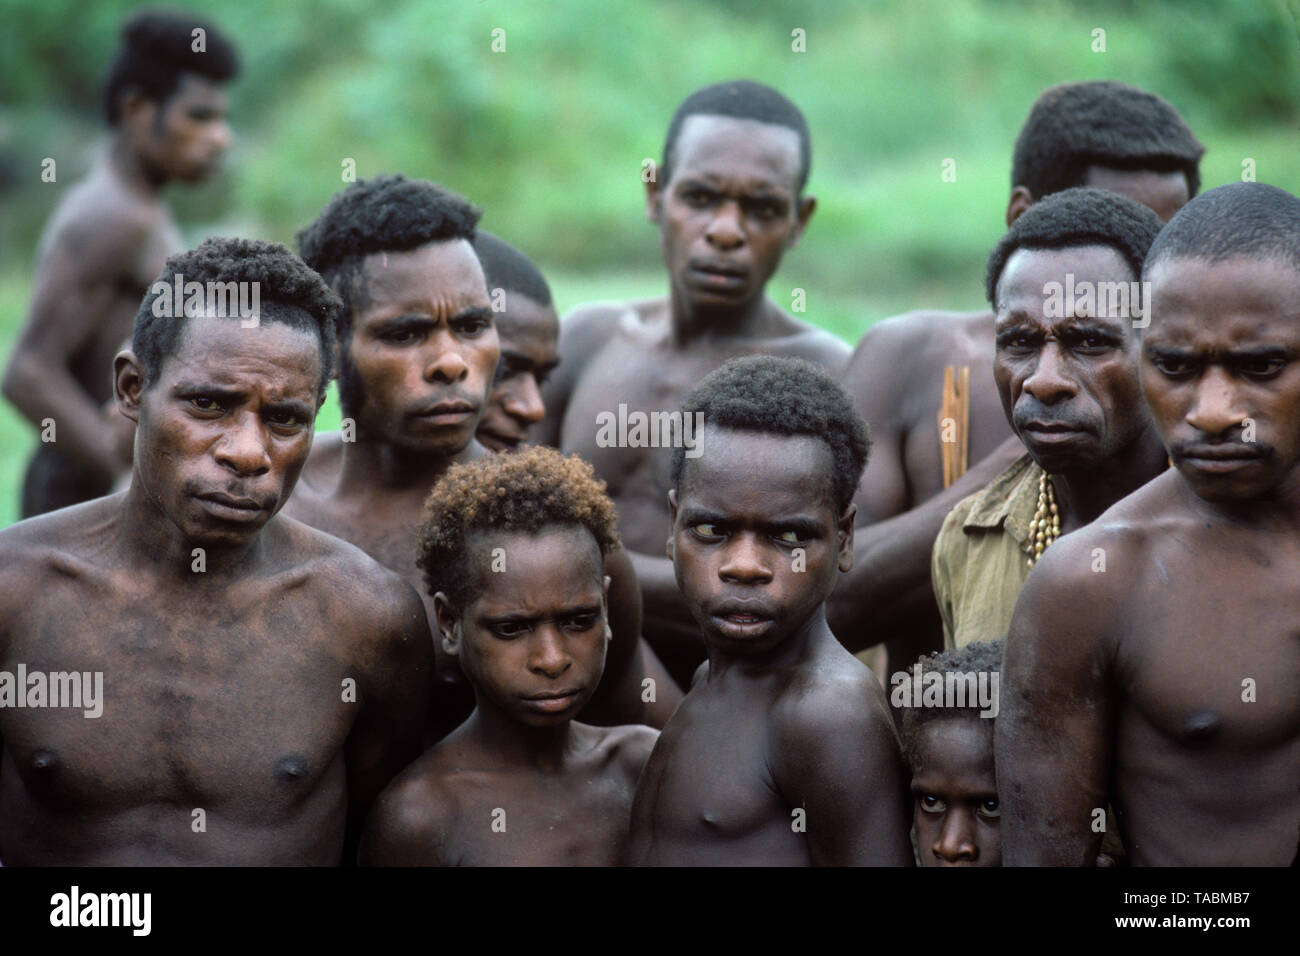 Asmat people: ethnic group living in the Papua province of Indonesia, along the Arafura Sea.  Asmat men and boys, village of Pirien. Photograph taken  Stock Photo